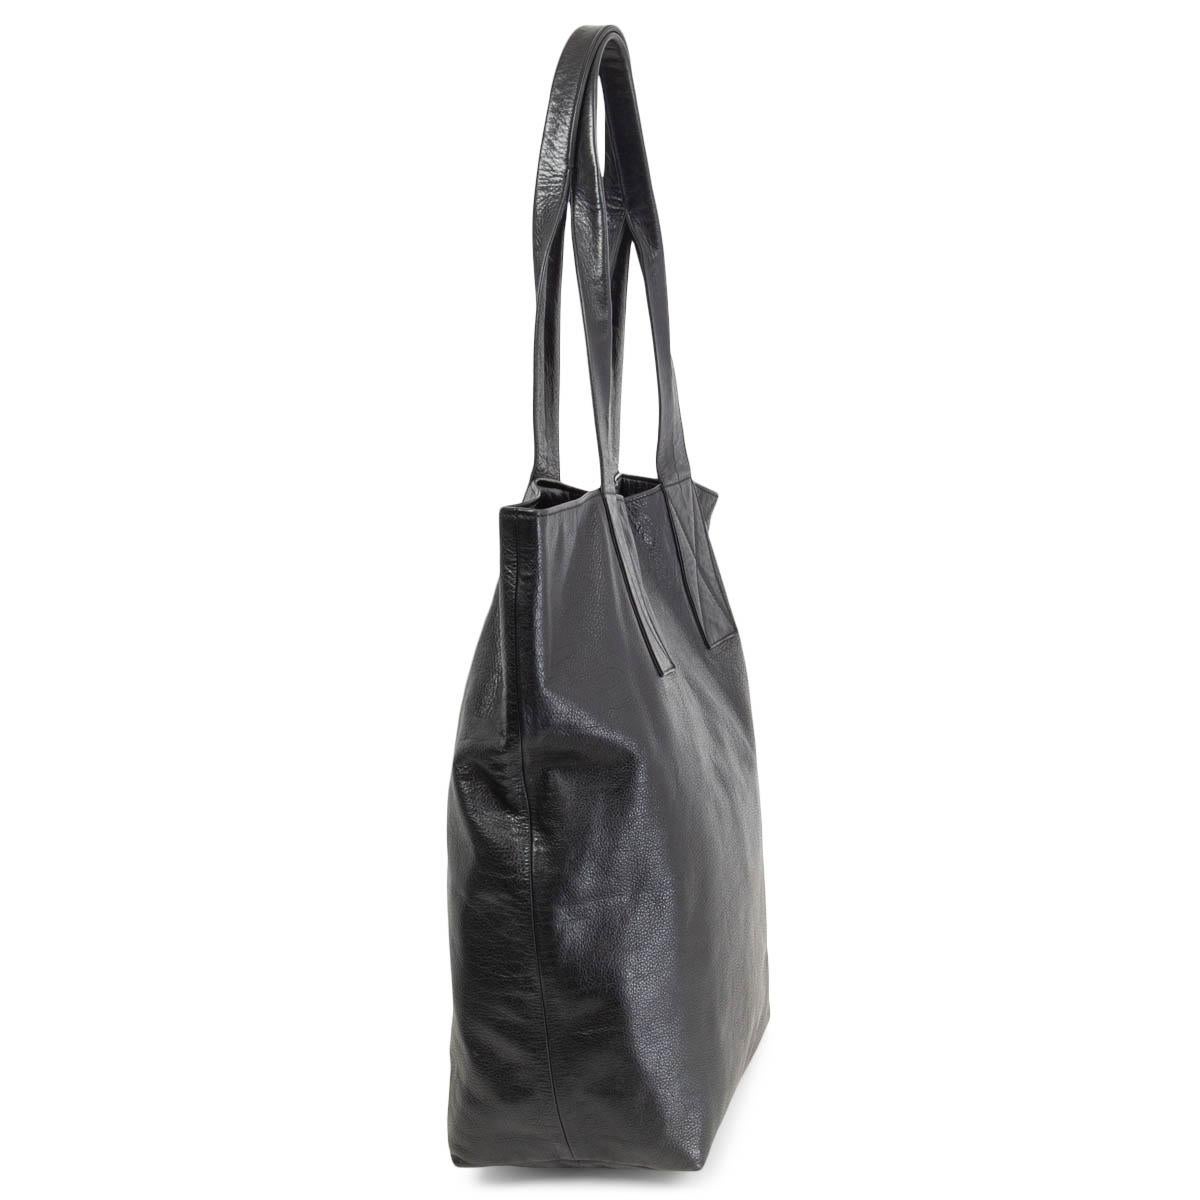 100% authentic Ann Demaulemeester shopper shoulder bag in black soft lambskin. Magnetic closure on top and lined in black canvas with two big zipper pockets and D ring. Has been carried and shows some wear to the corners. Overall in very good